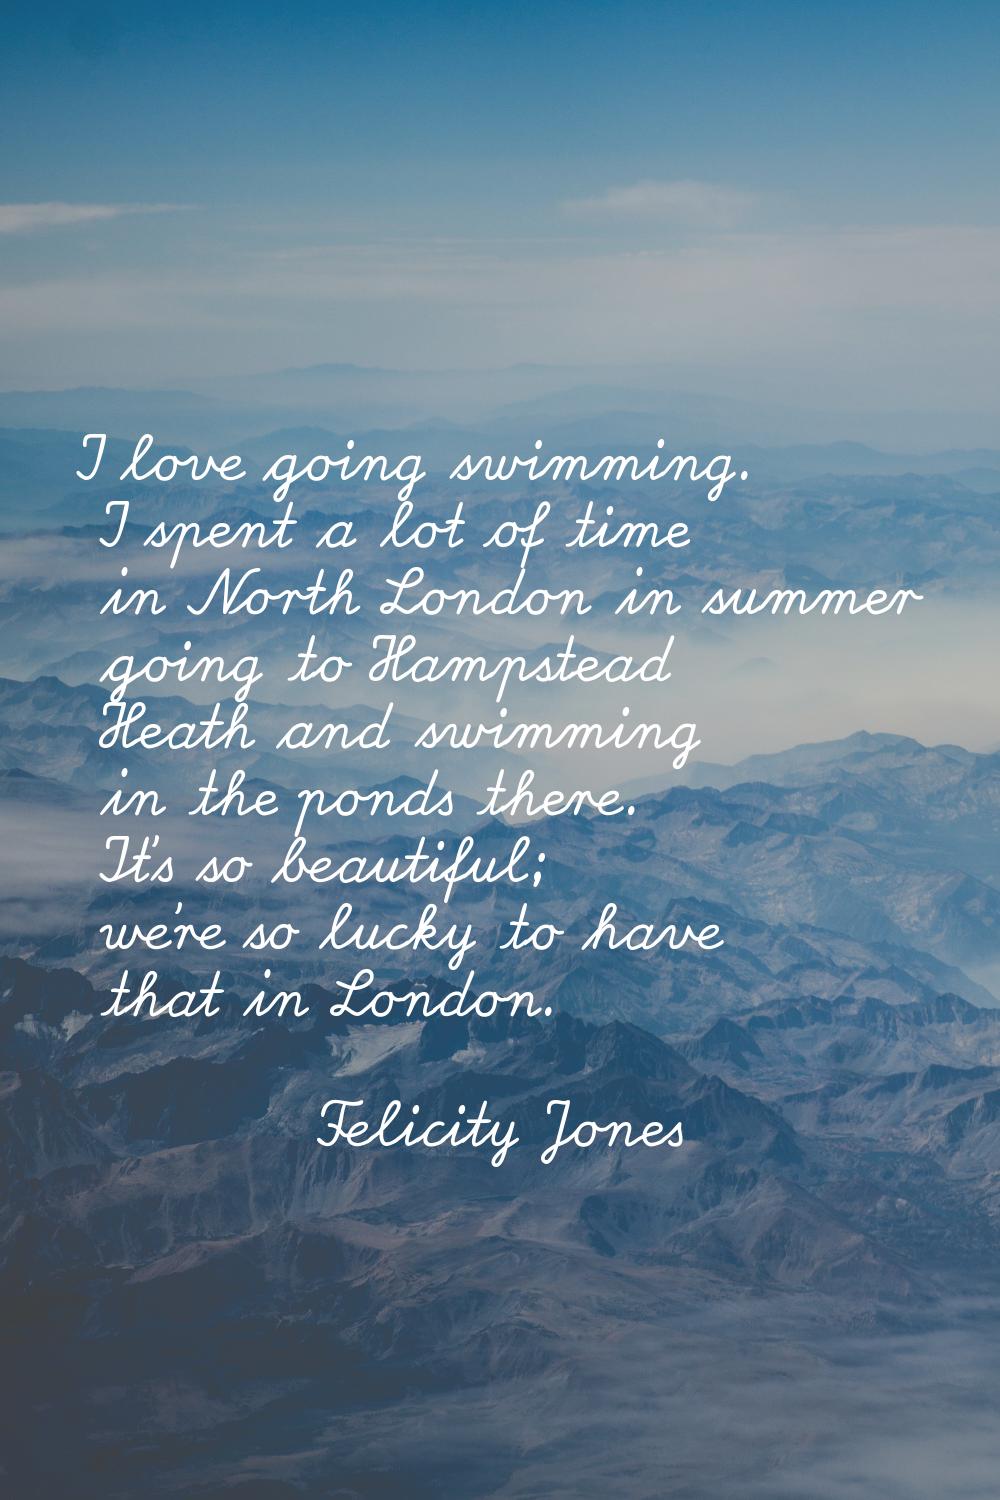 I love going swimming. I spent a lot of time in North London in summer going to Hampstead Heath and